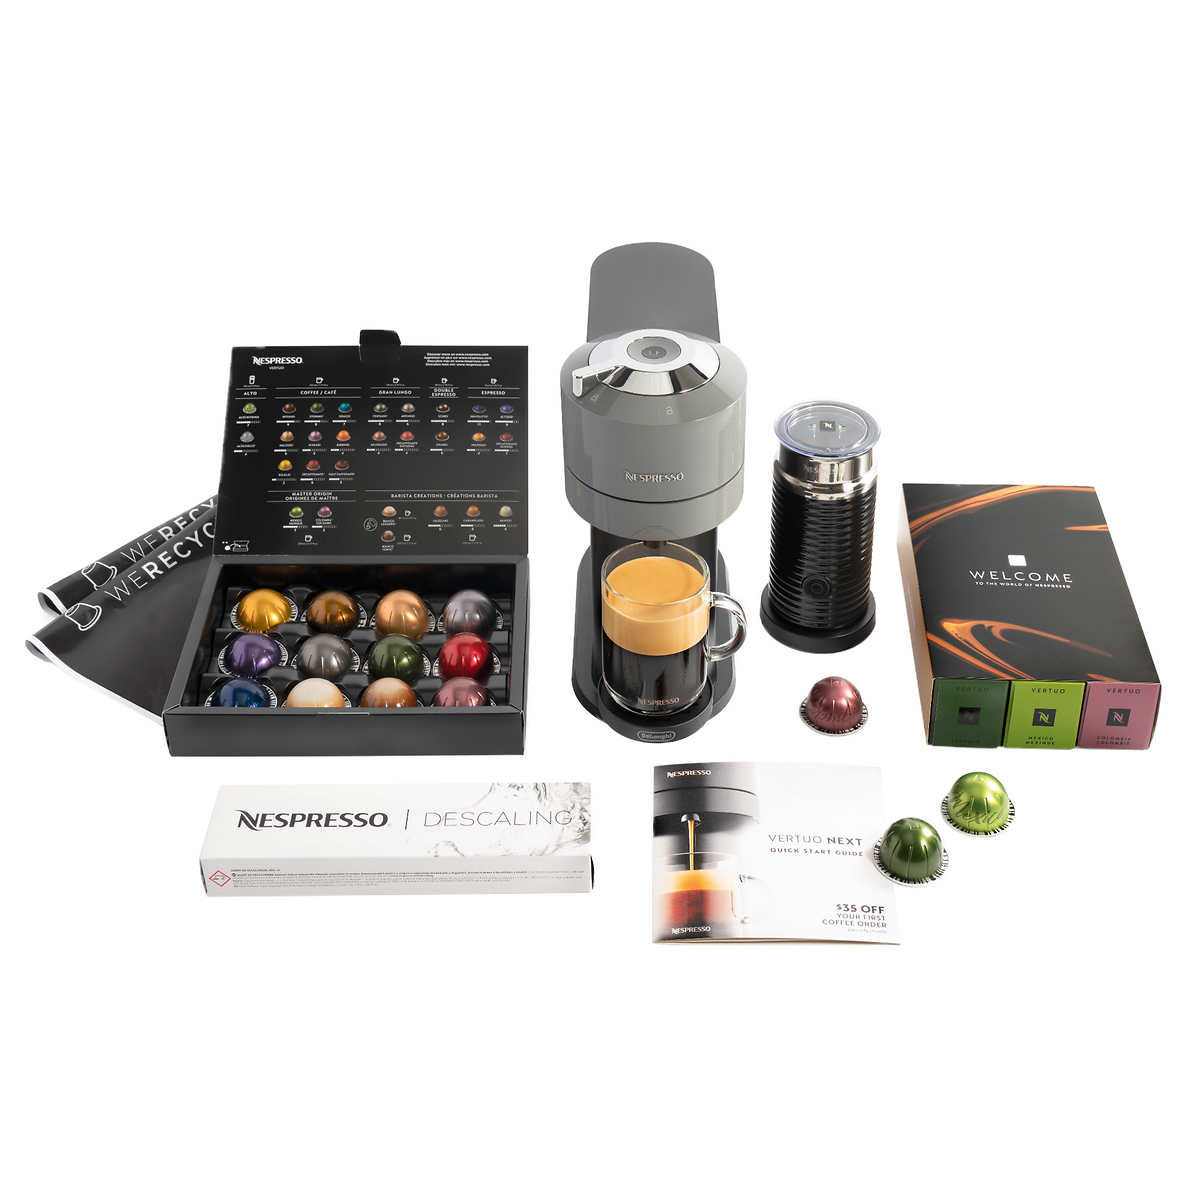 NESPRESSO DESCALING KIT INCLUDES 2 UNITS NEW VERSION,NEW